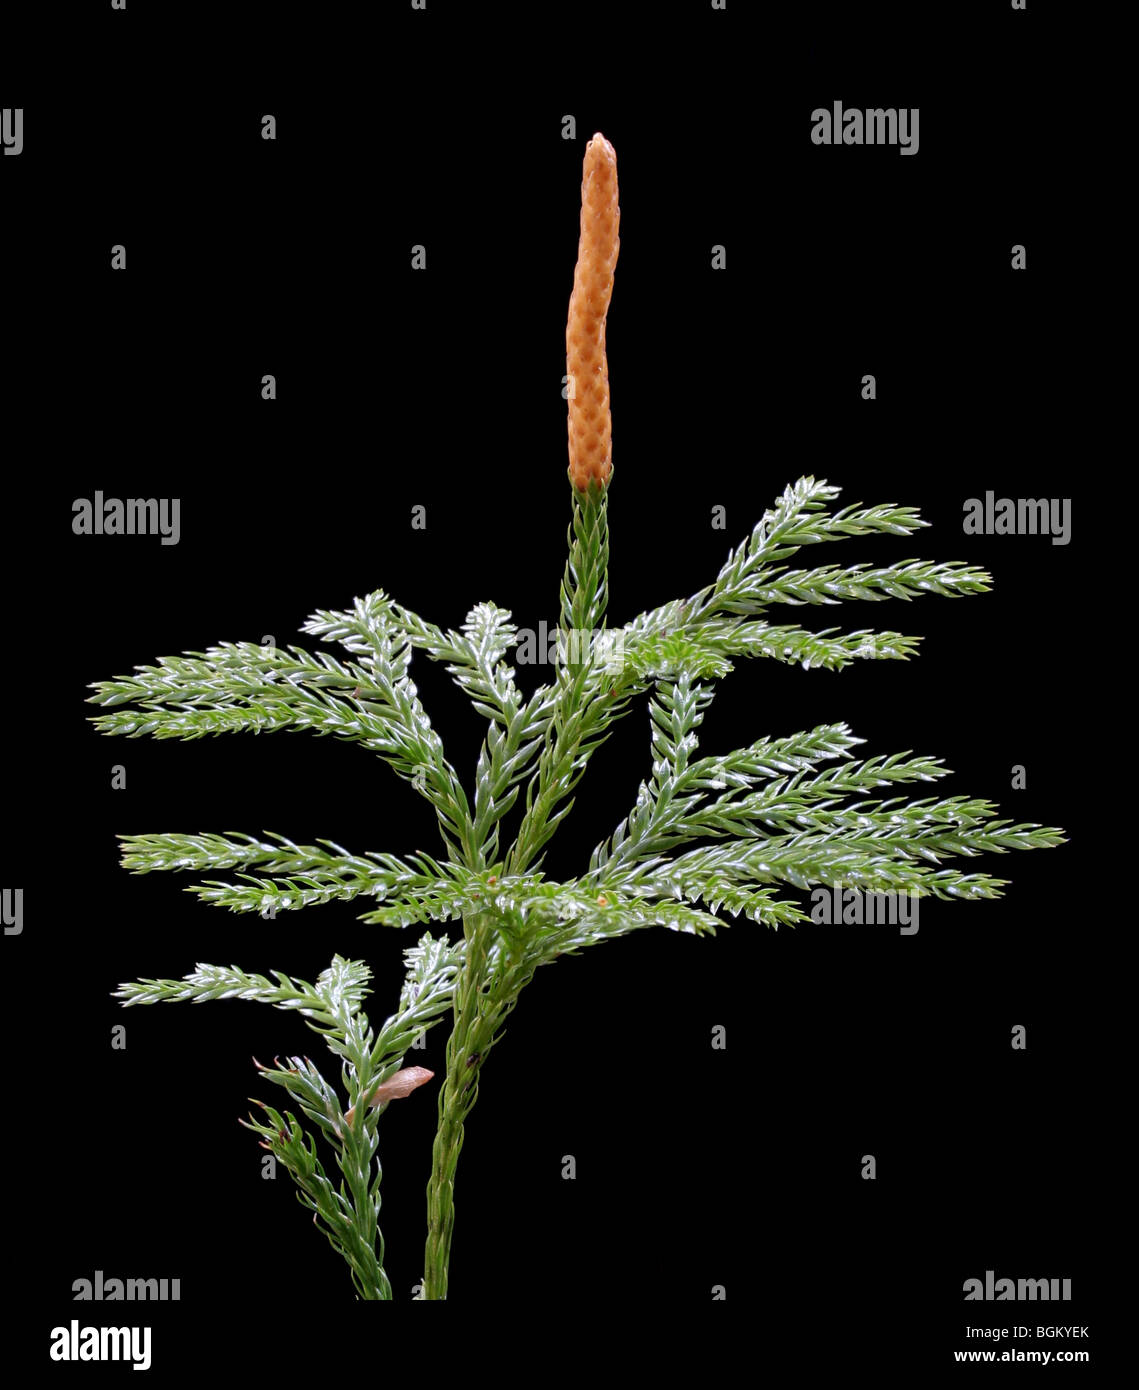 Tree club moss, Lycopodium obscurum, with a single strobilus, on a black background. Stock Photo